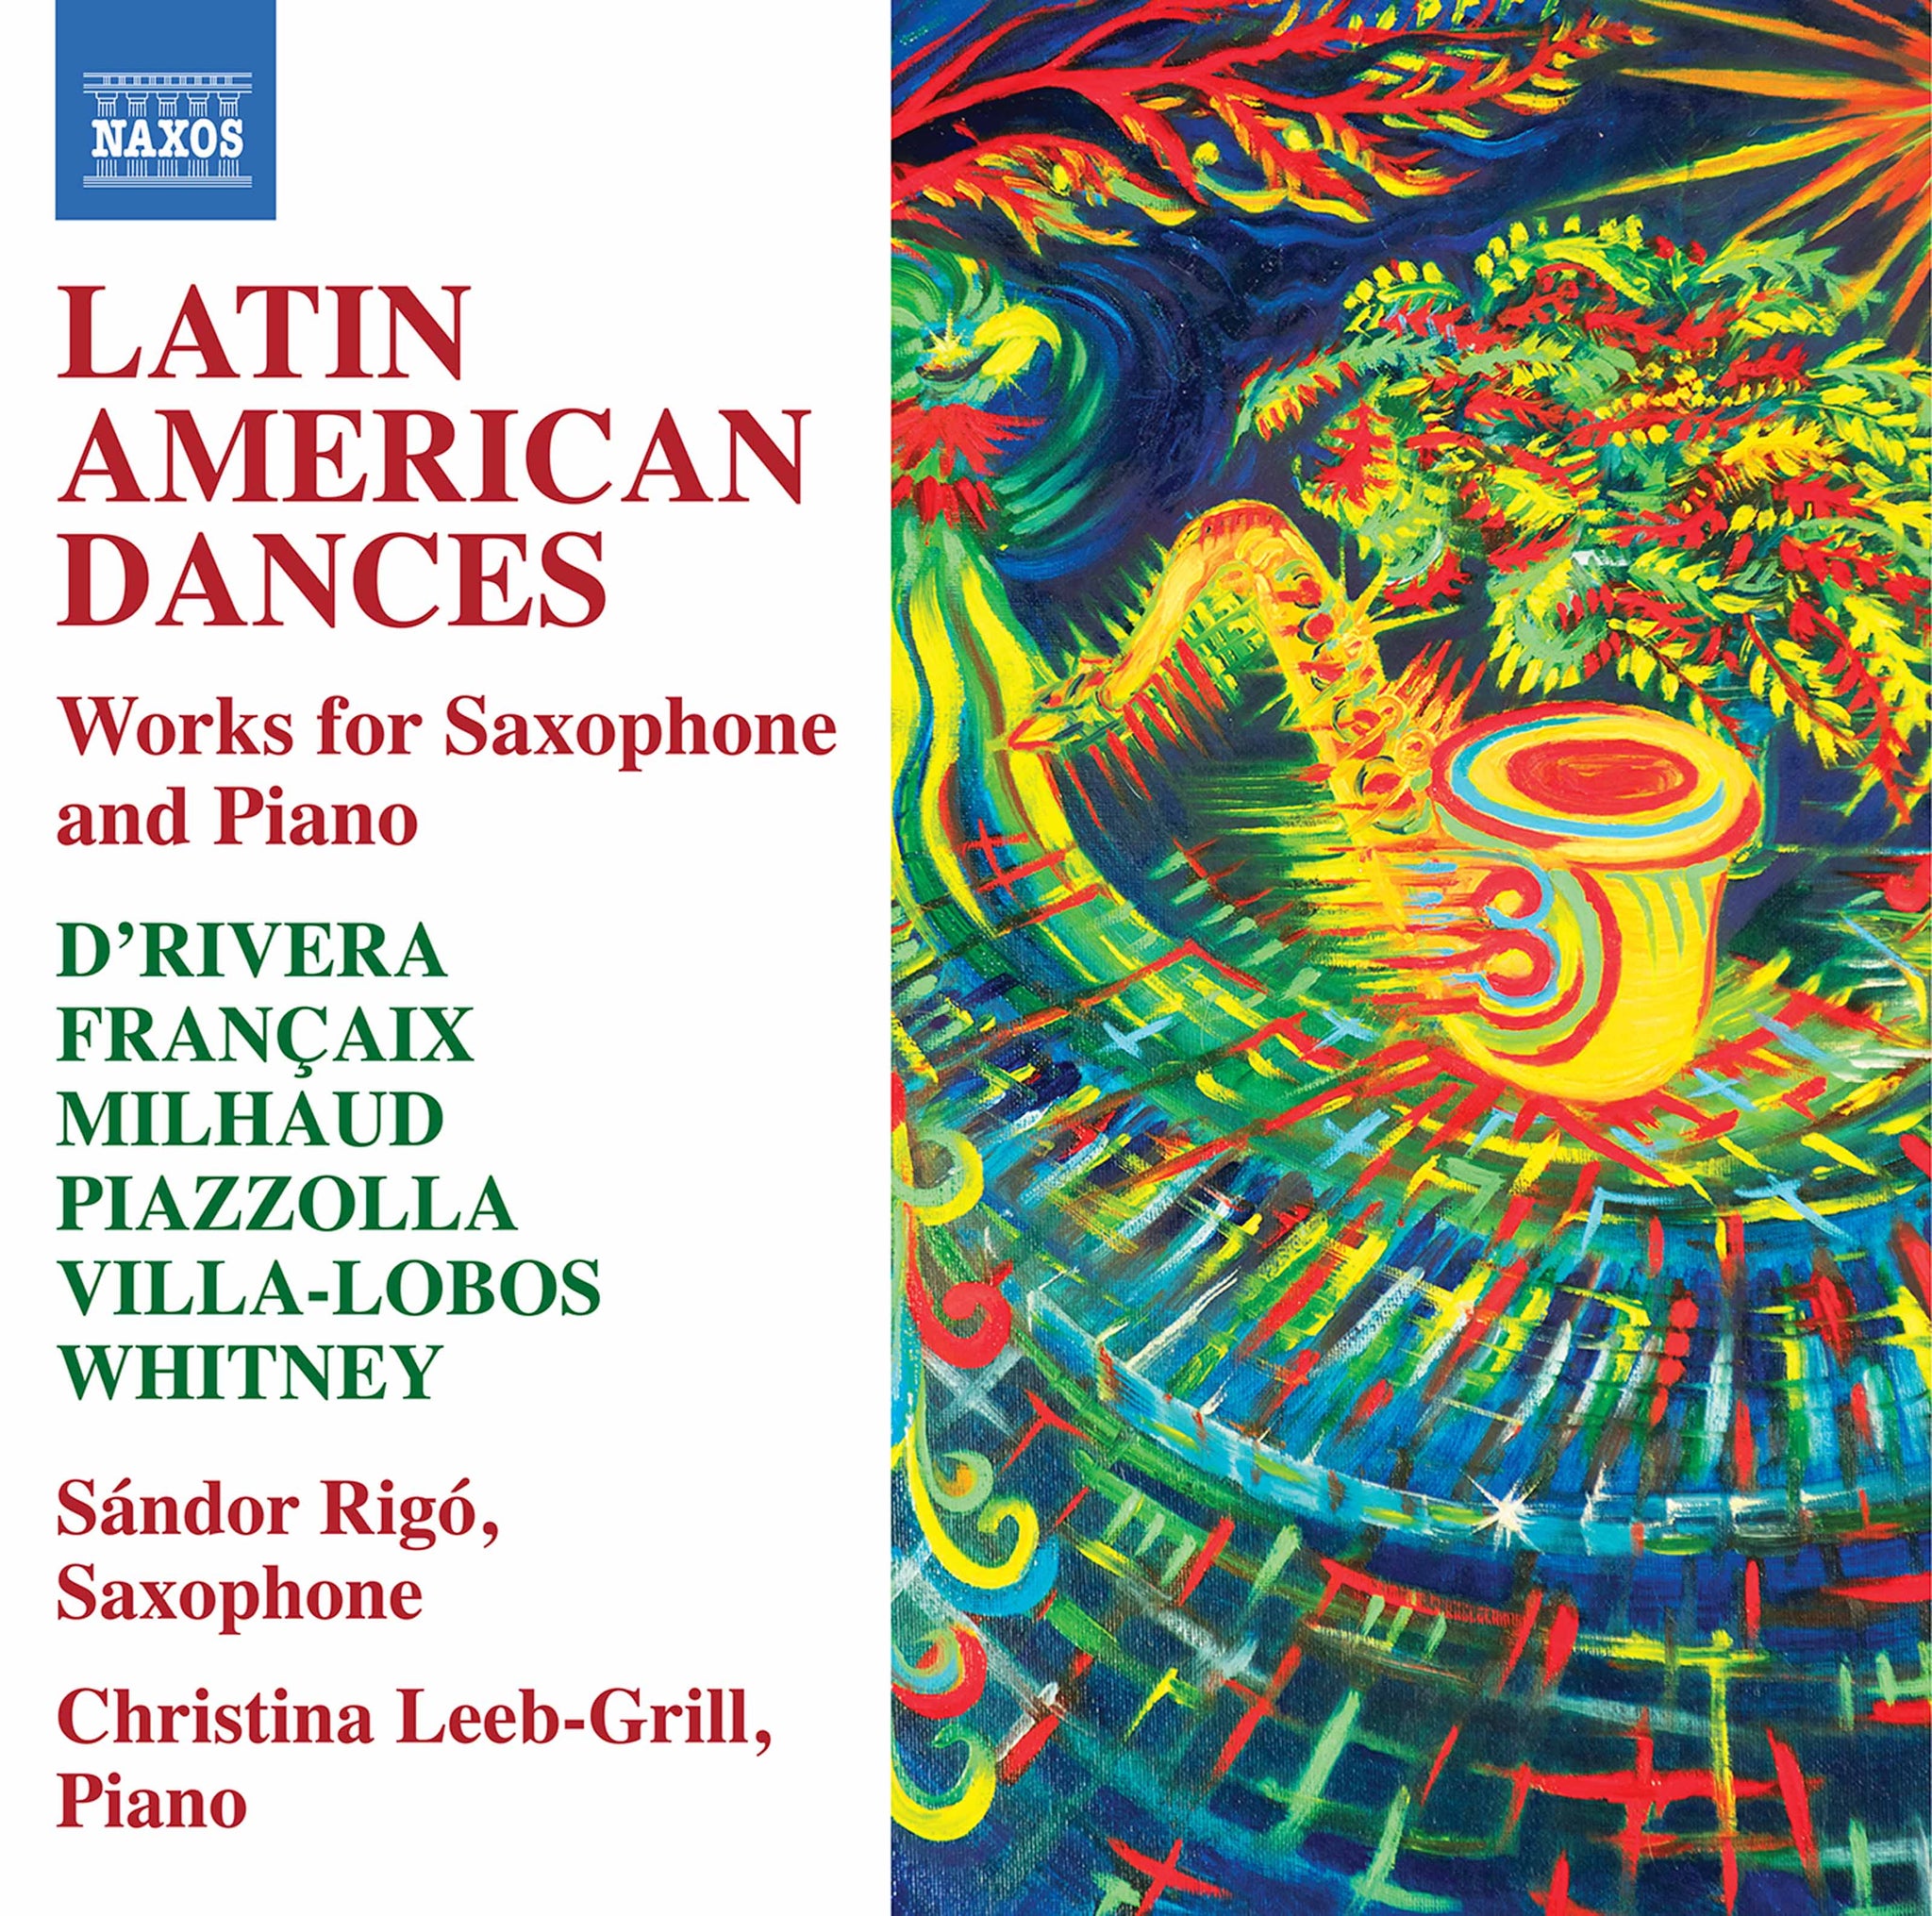 Latin American Dances - Works for Saxophone and Piano / Rigó, Leeb-Grill